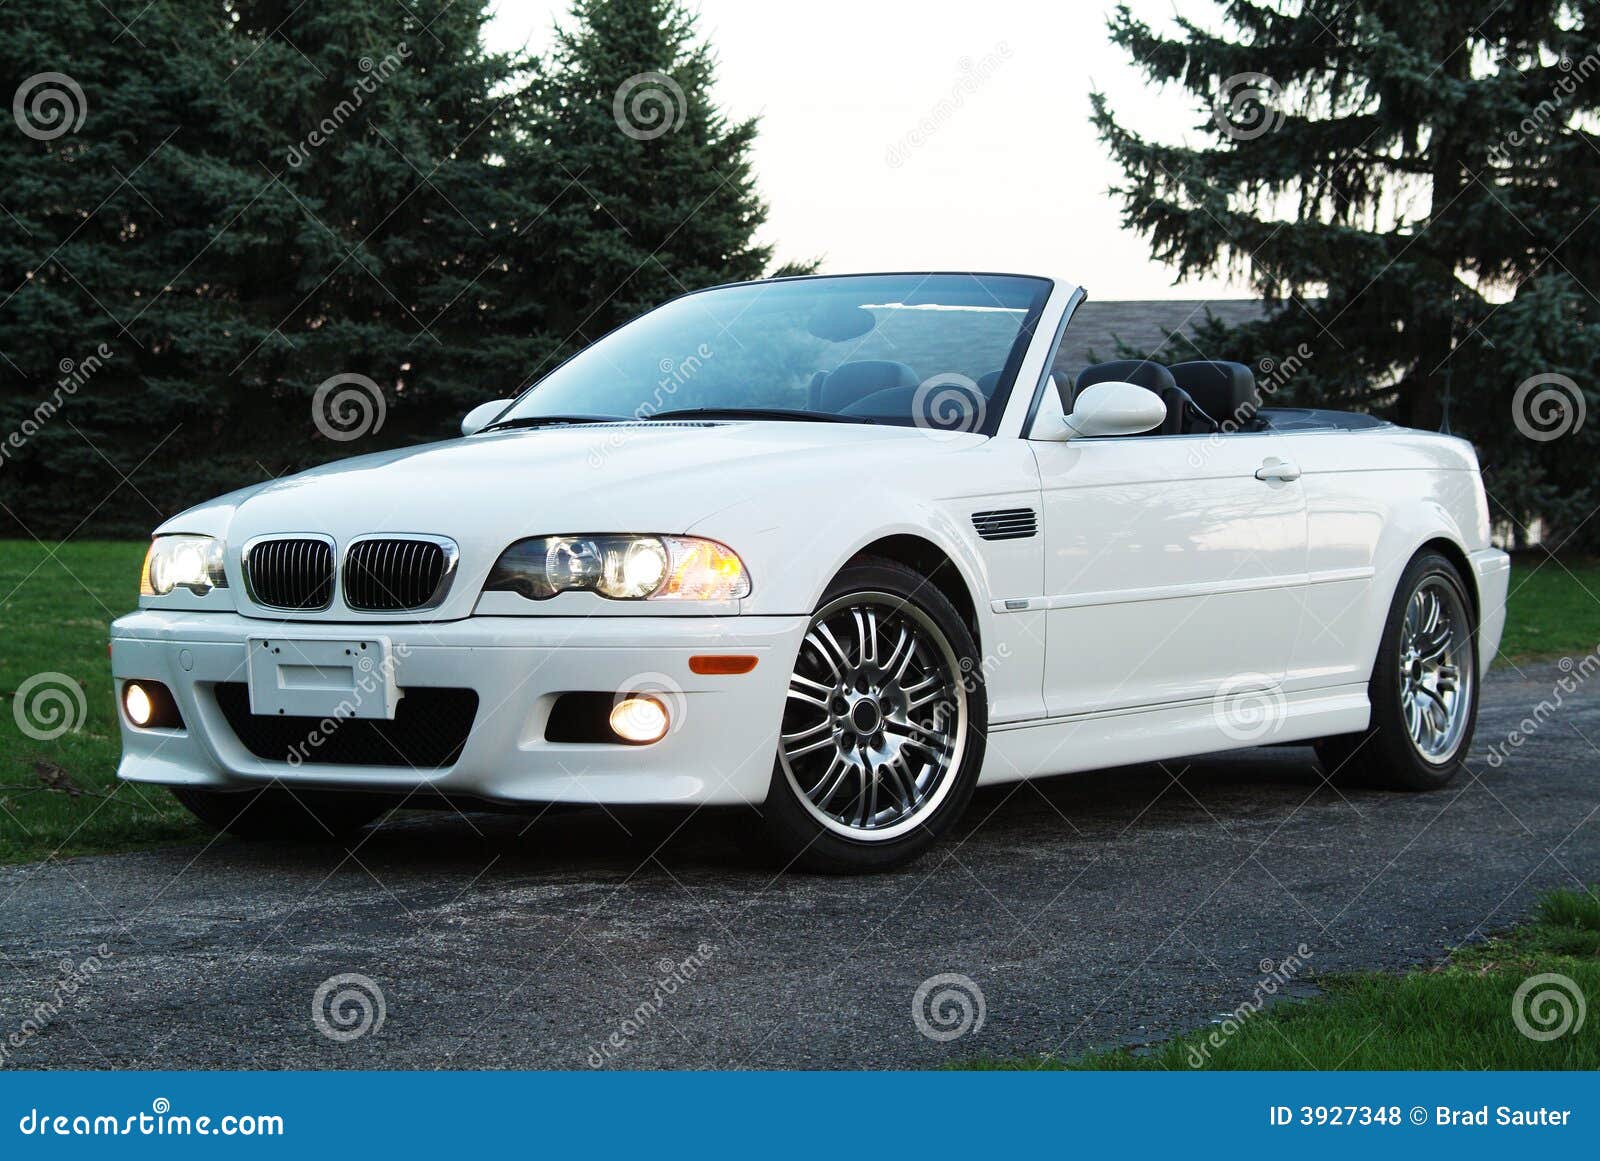 Convertible Sports Car stock photo. Image of fast, wheels - 3927348